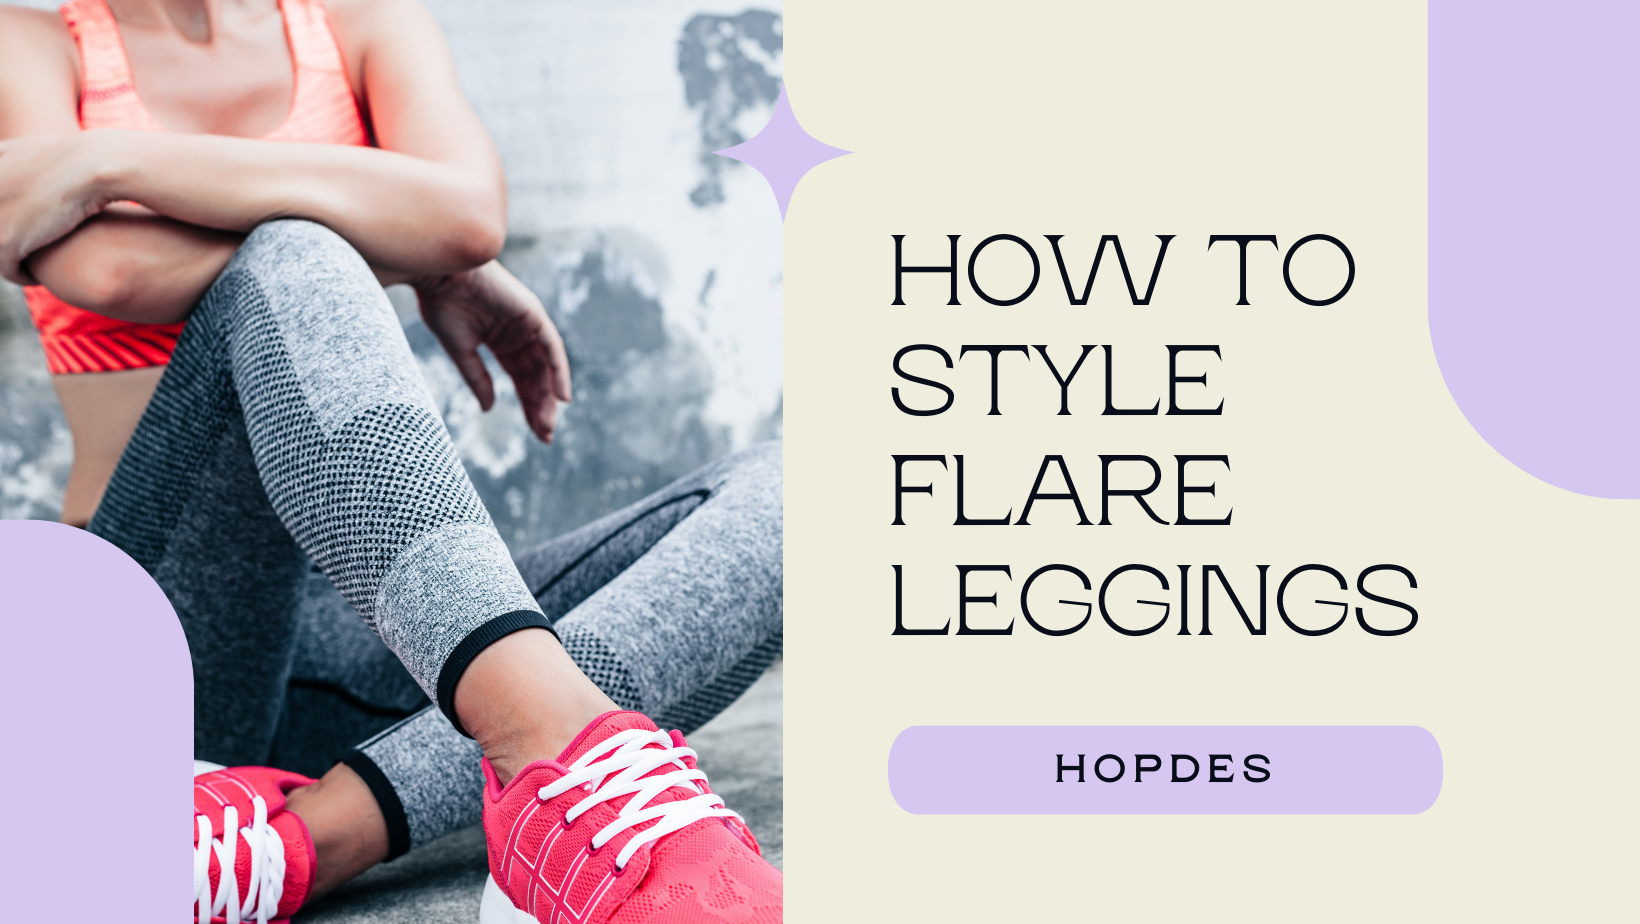 What to Wear with Flare Leggings? TOP 8 Styling Ideas